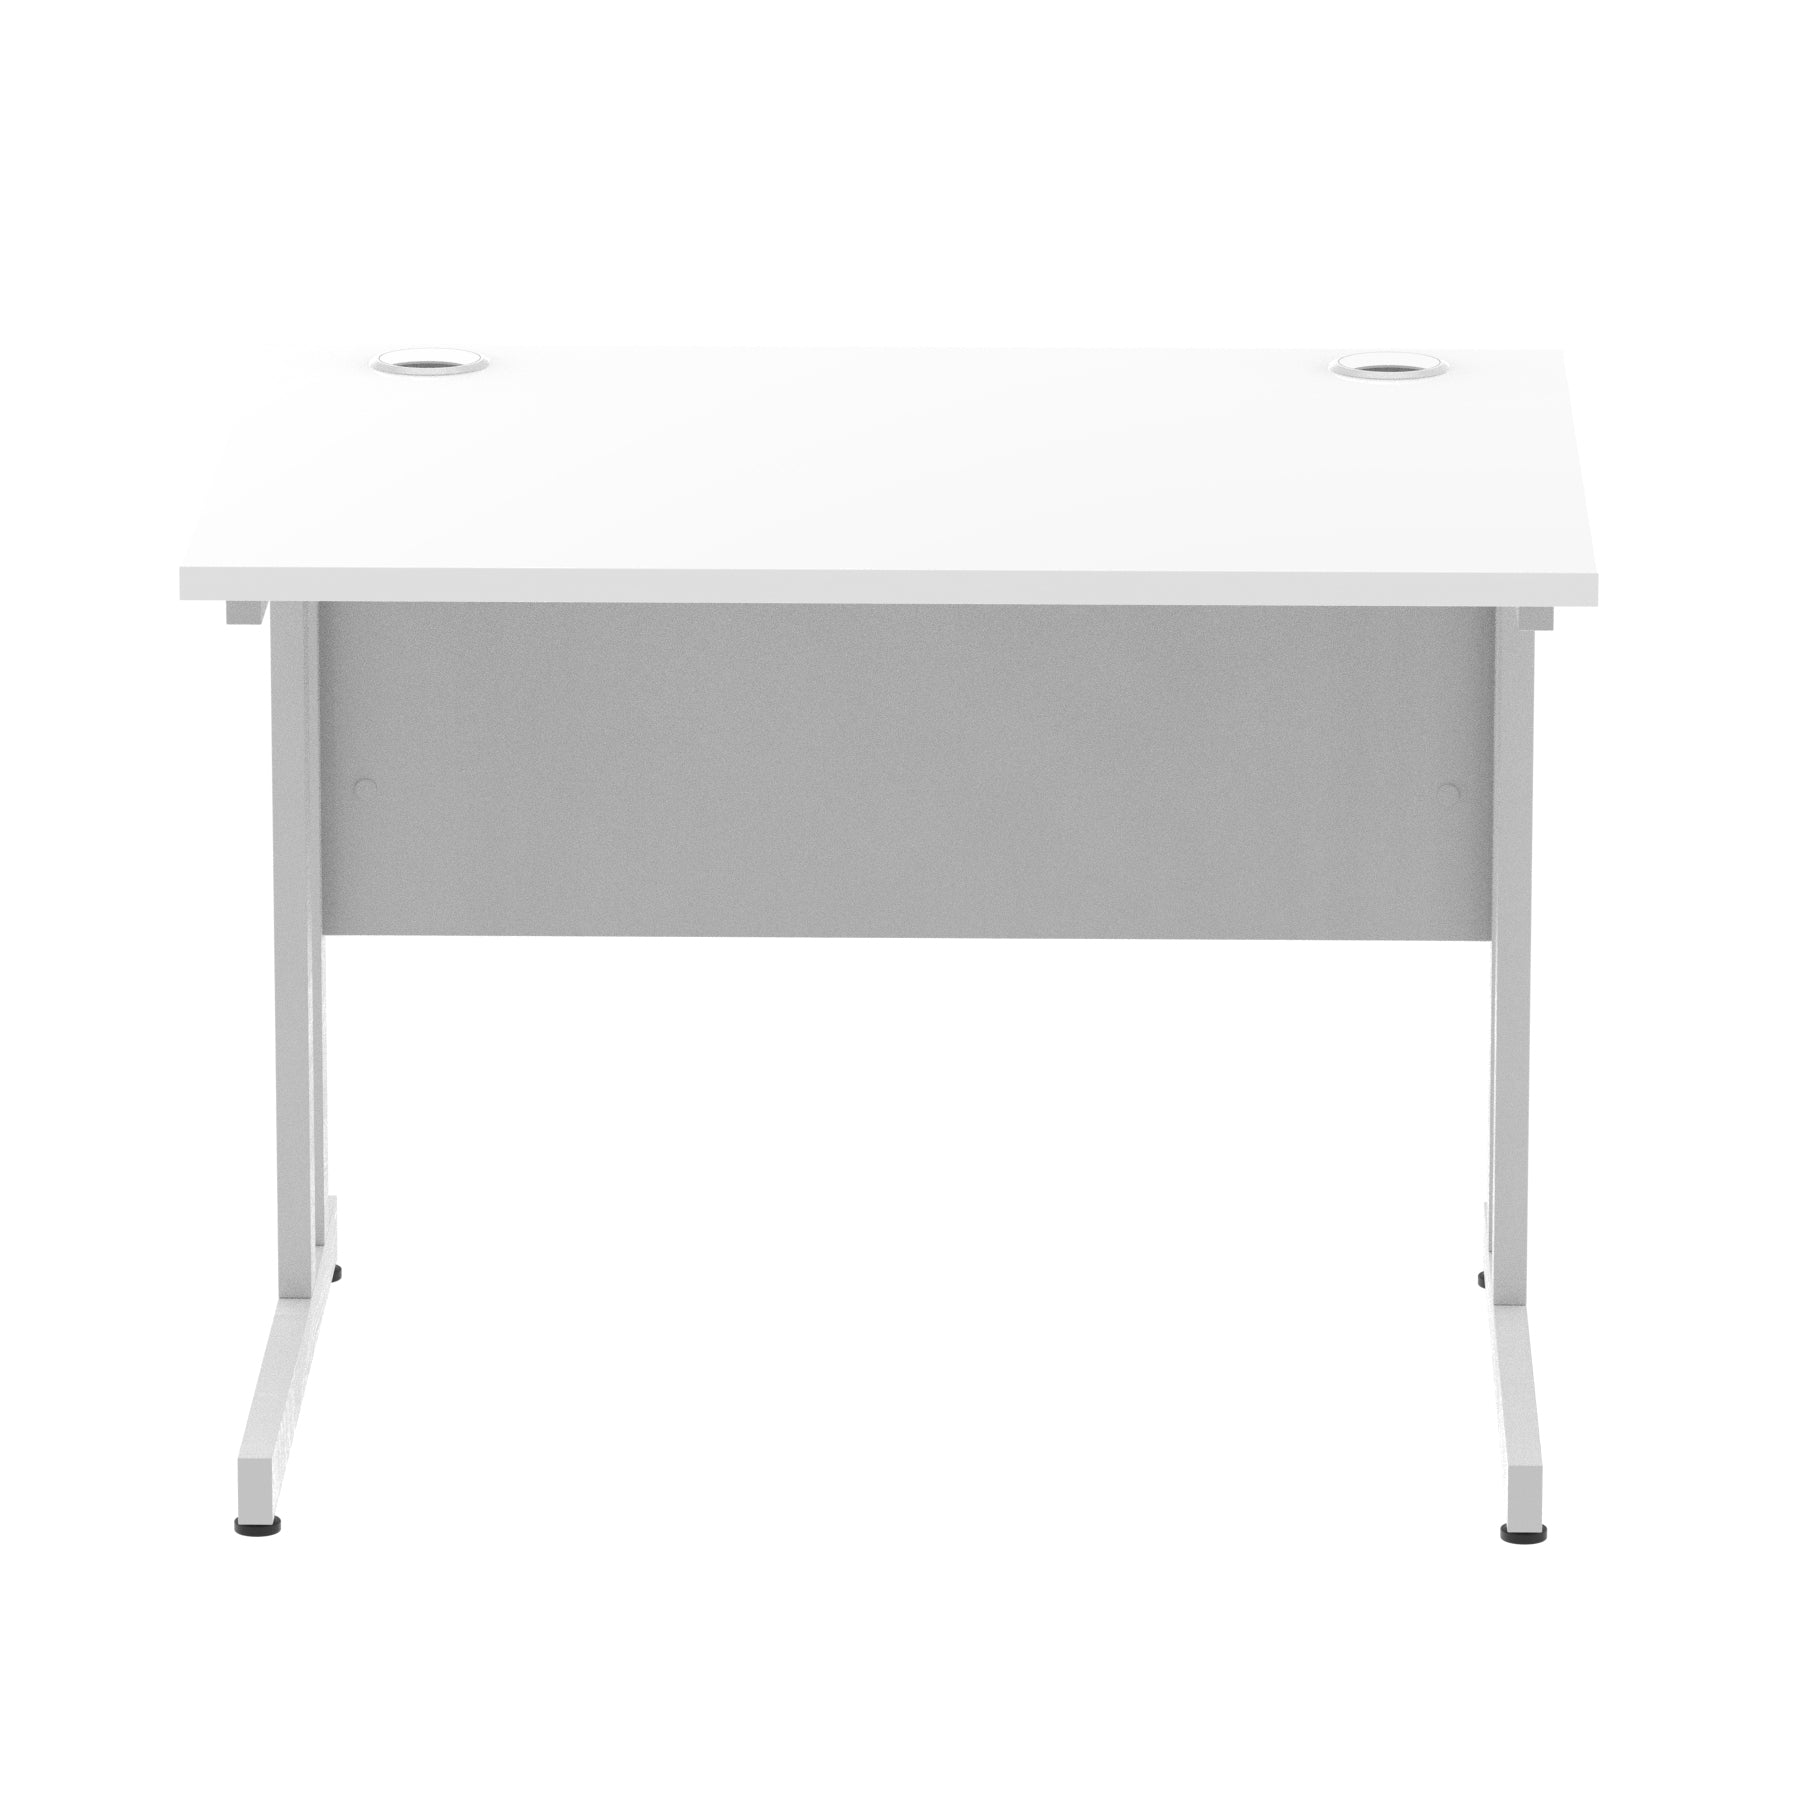 Impulse 1000mm Straight Desk Cantilever Leg - Rectangular MFC, Self-Assembly, 5-Year Guarantee, Silver/Black/White Frame, 1000x800 Top Size